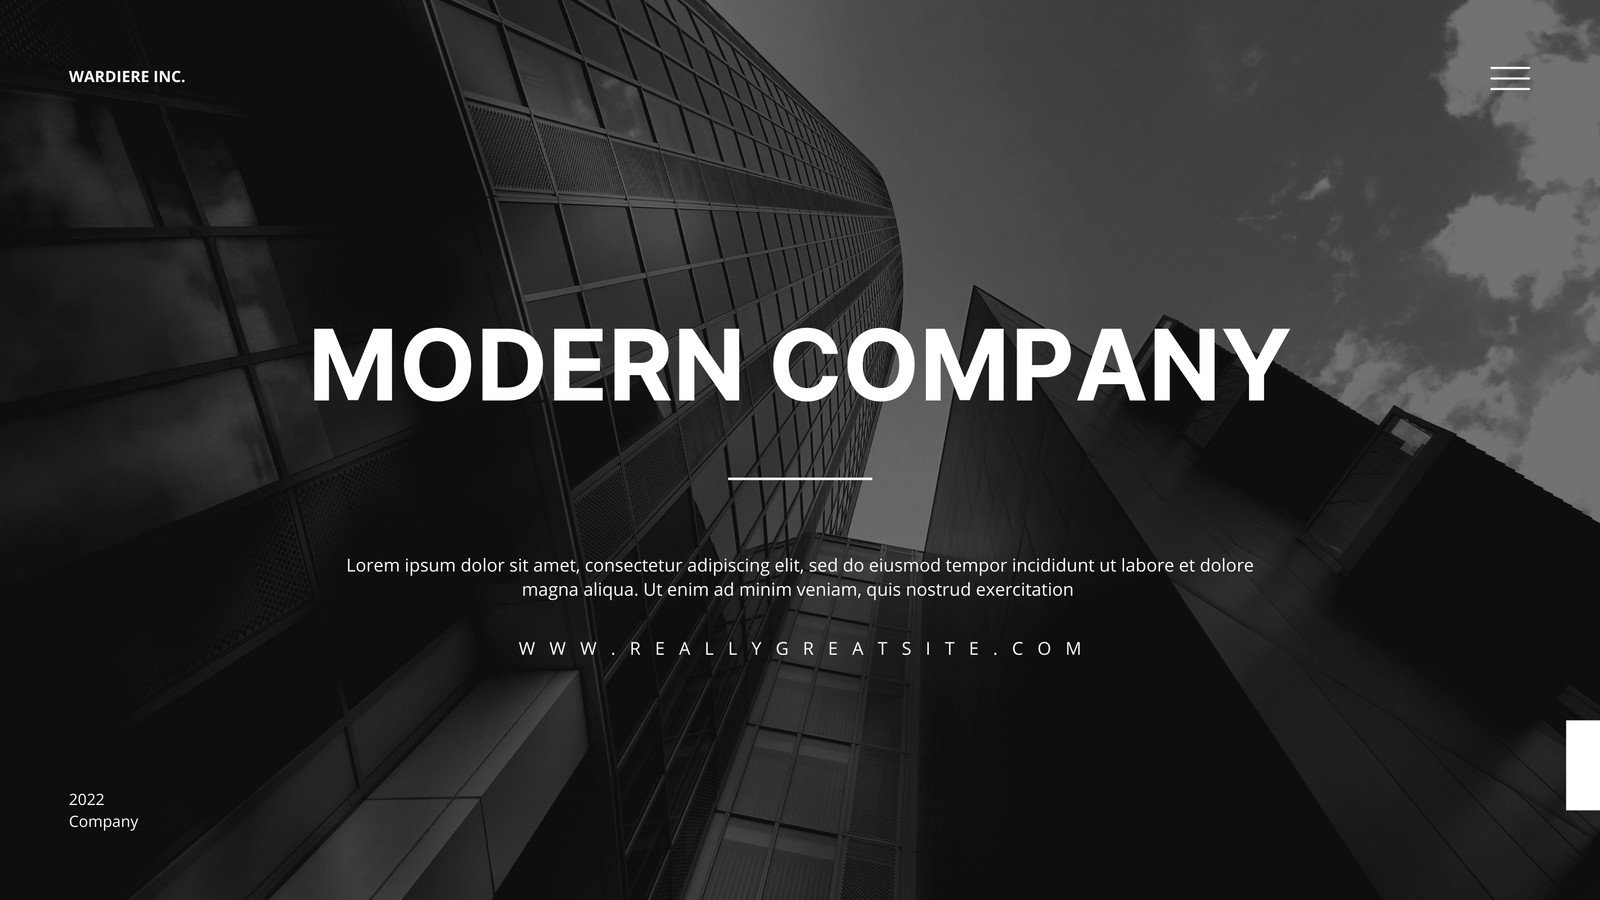 Free and customizable company templates